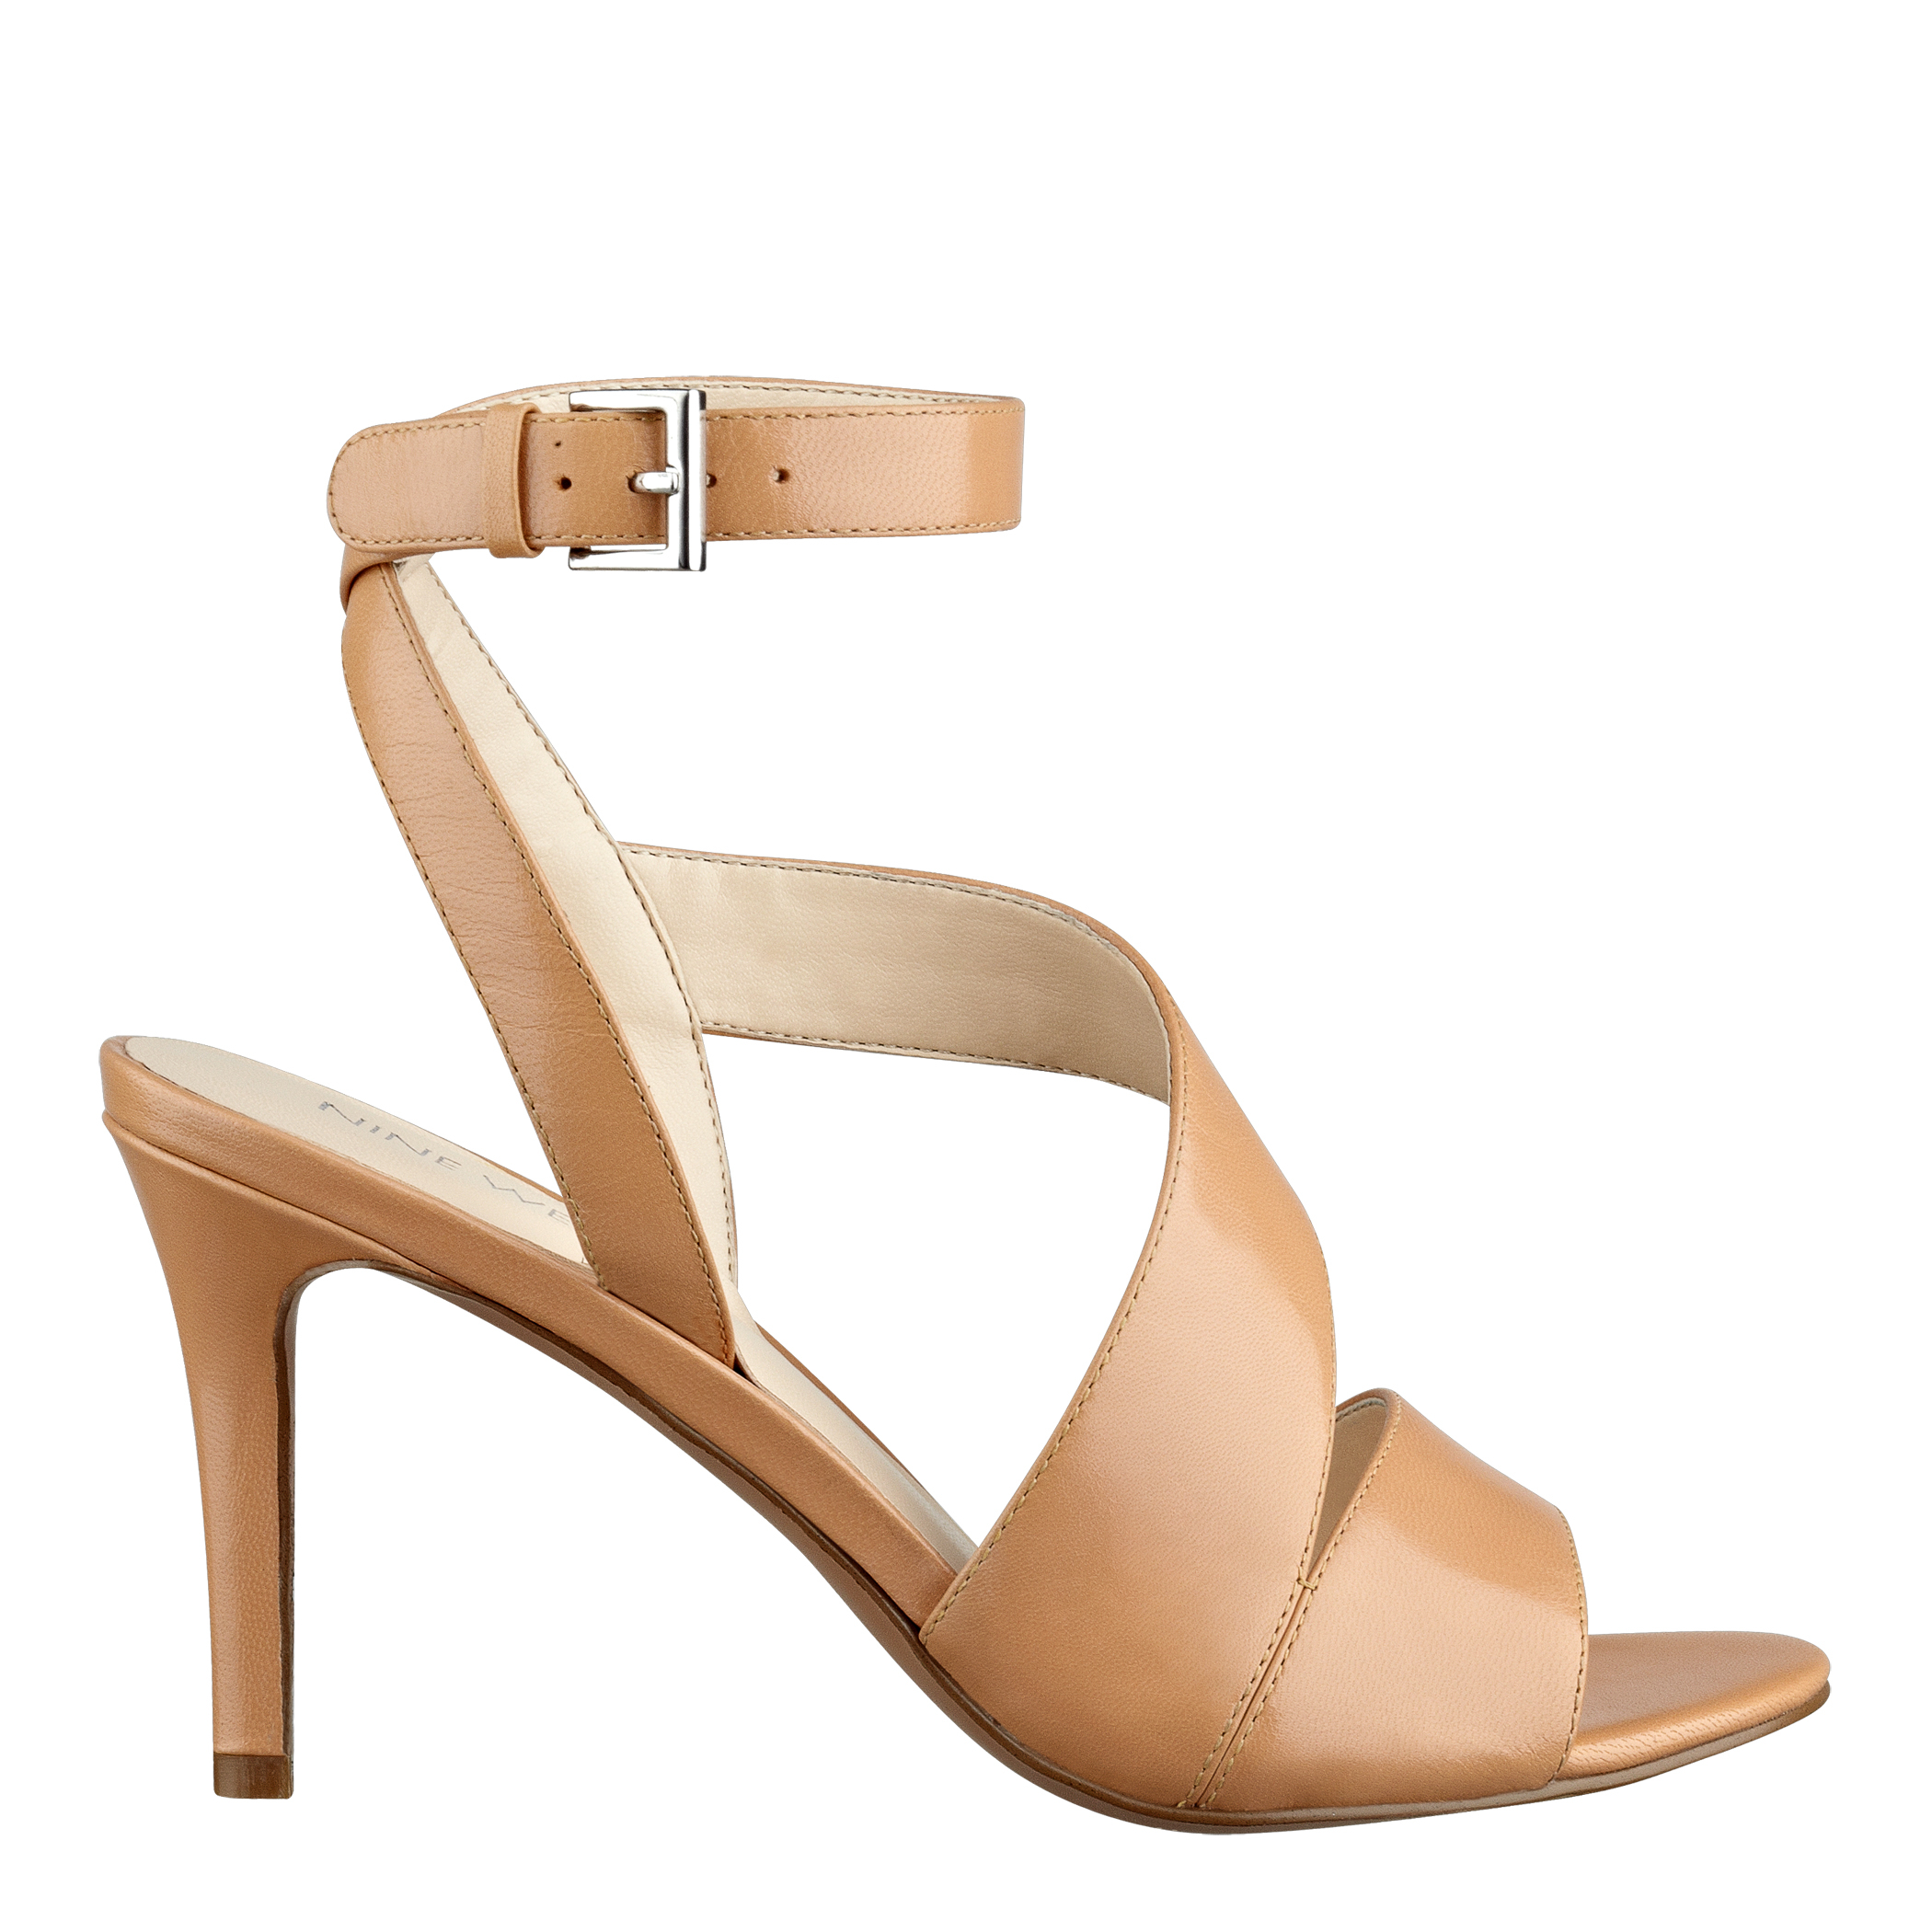 Nine West Ibby Ankle Strap Heels in Beige (NATURAL LEATHER) | Lyst